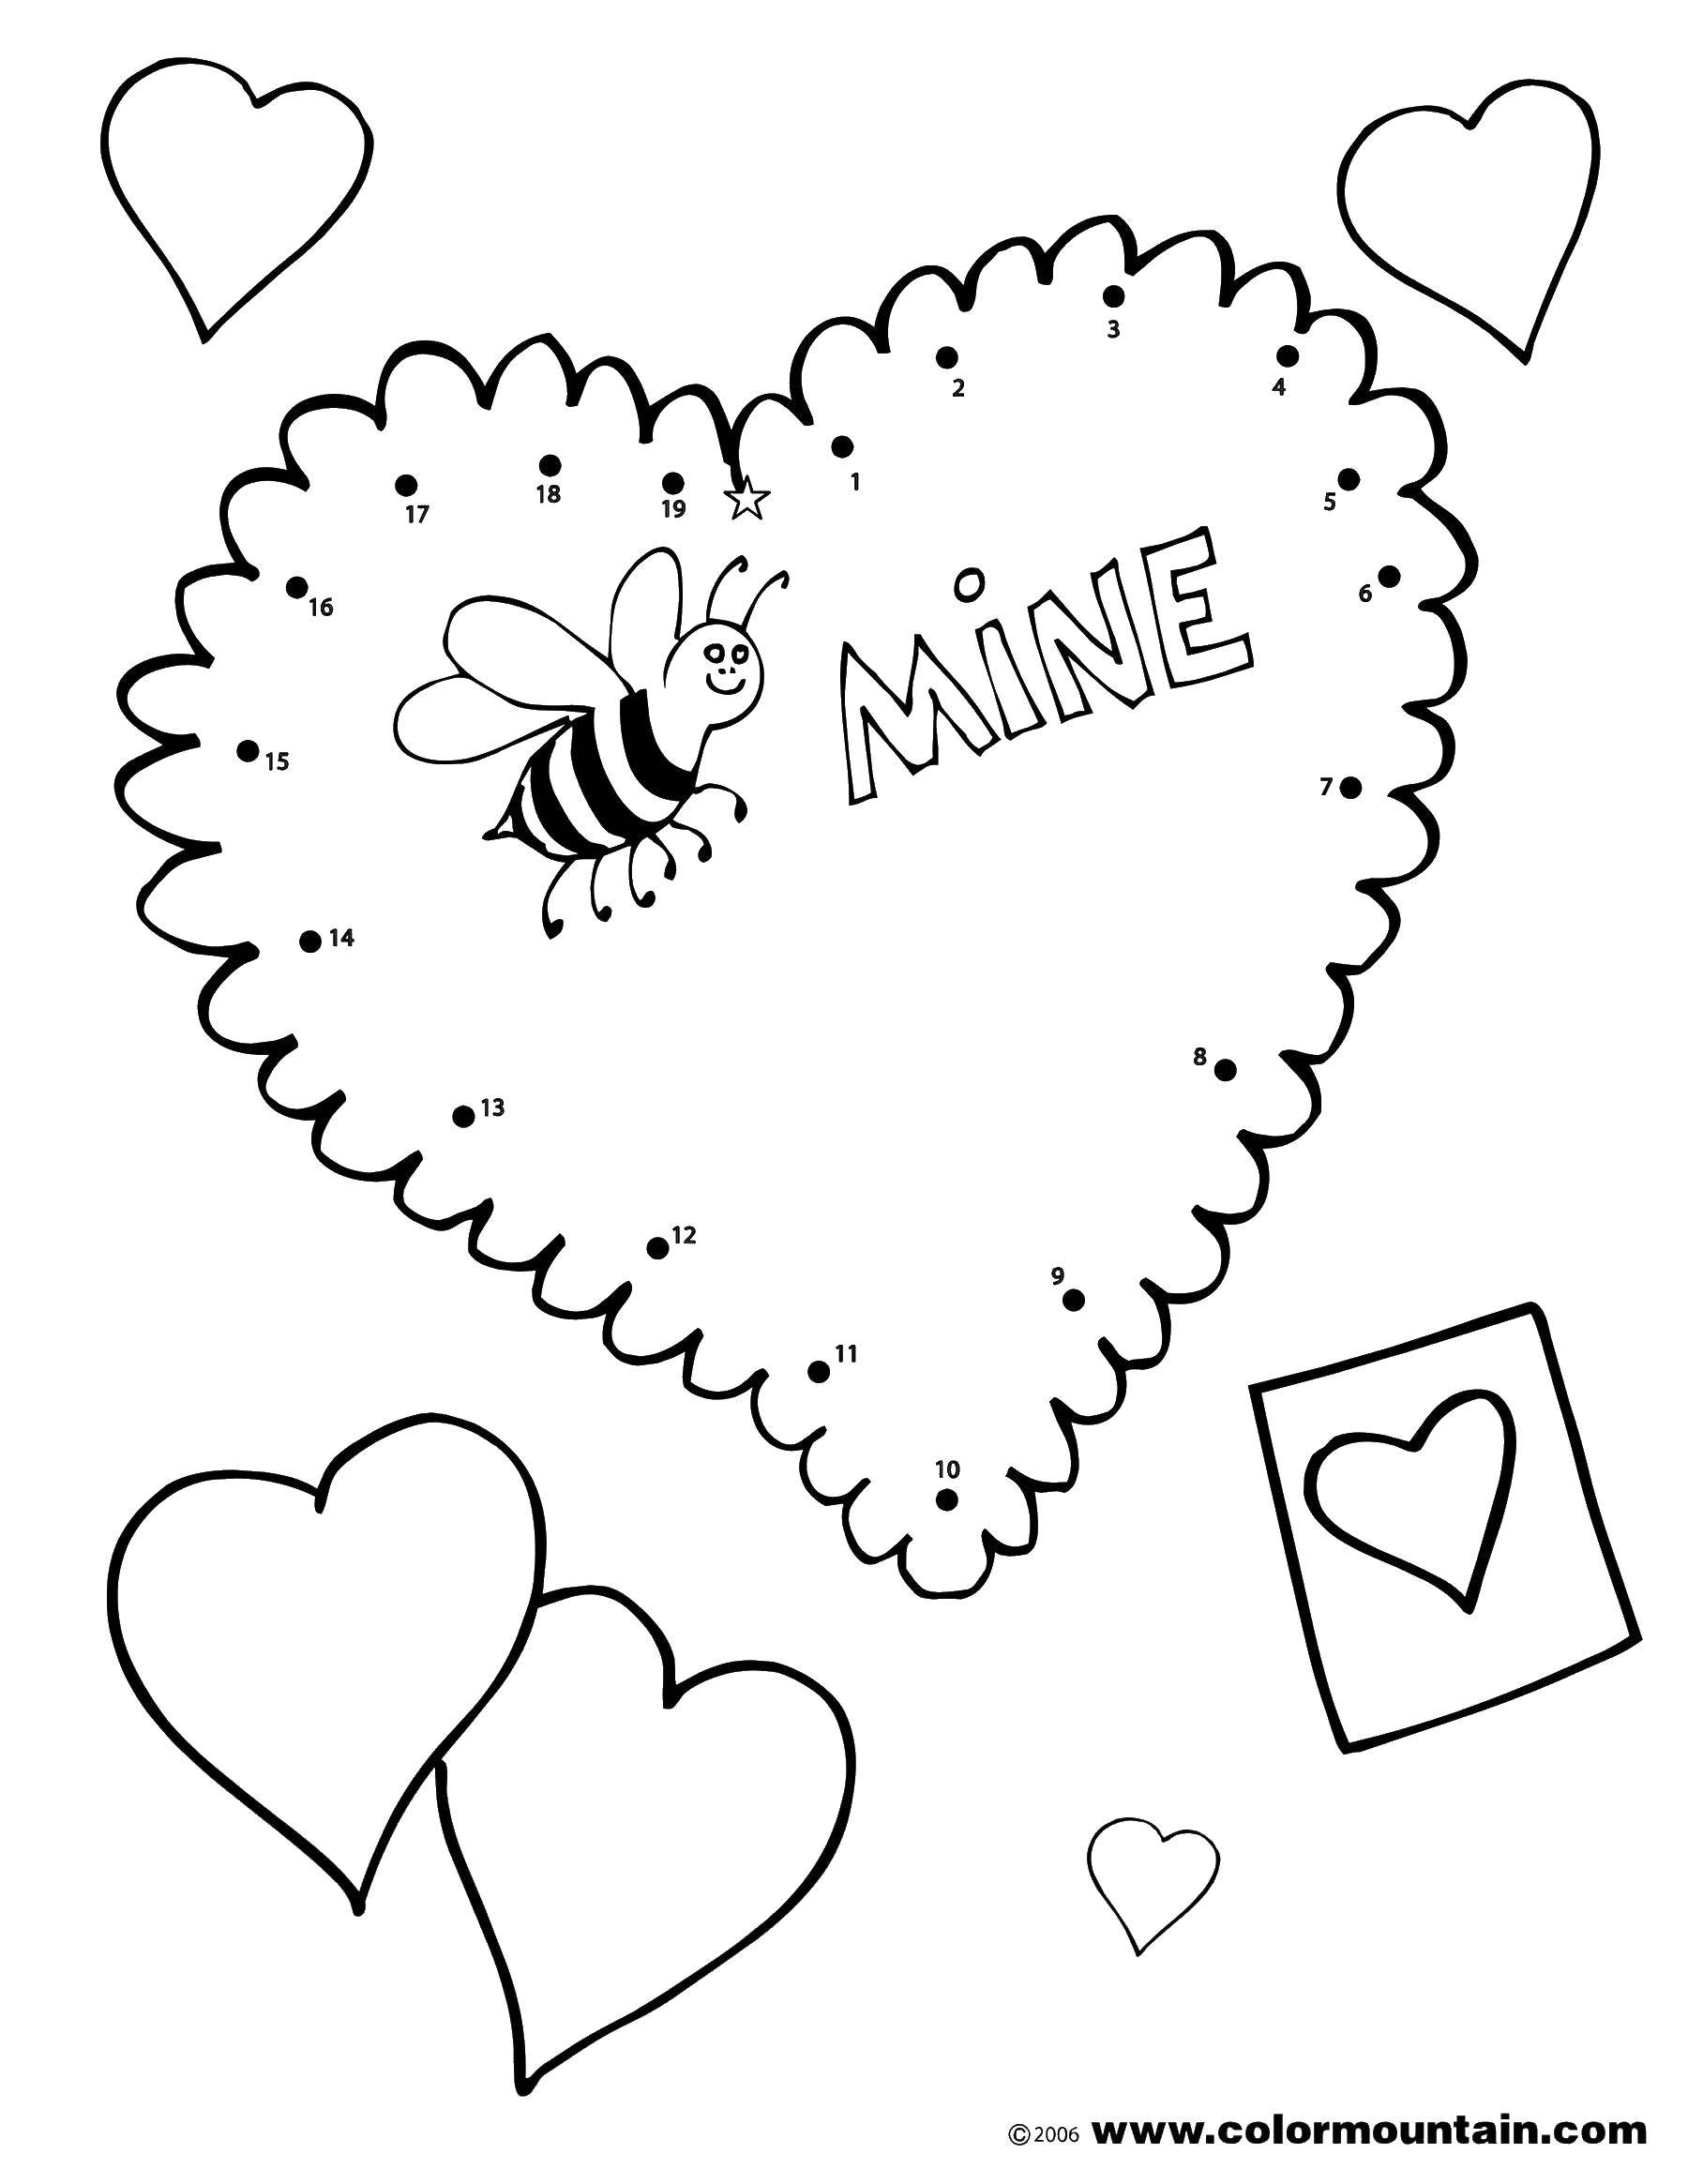 Coloring Heart bee. Category Valentines day. Tags:  heart, bee, card.